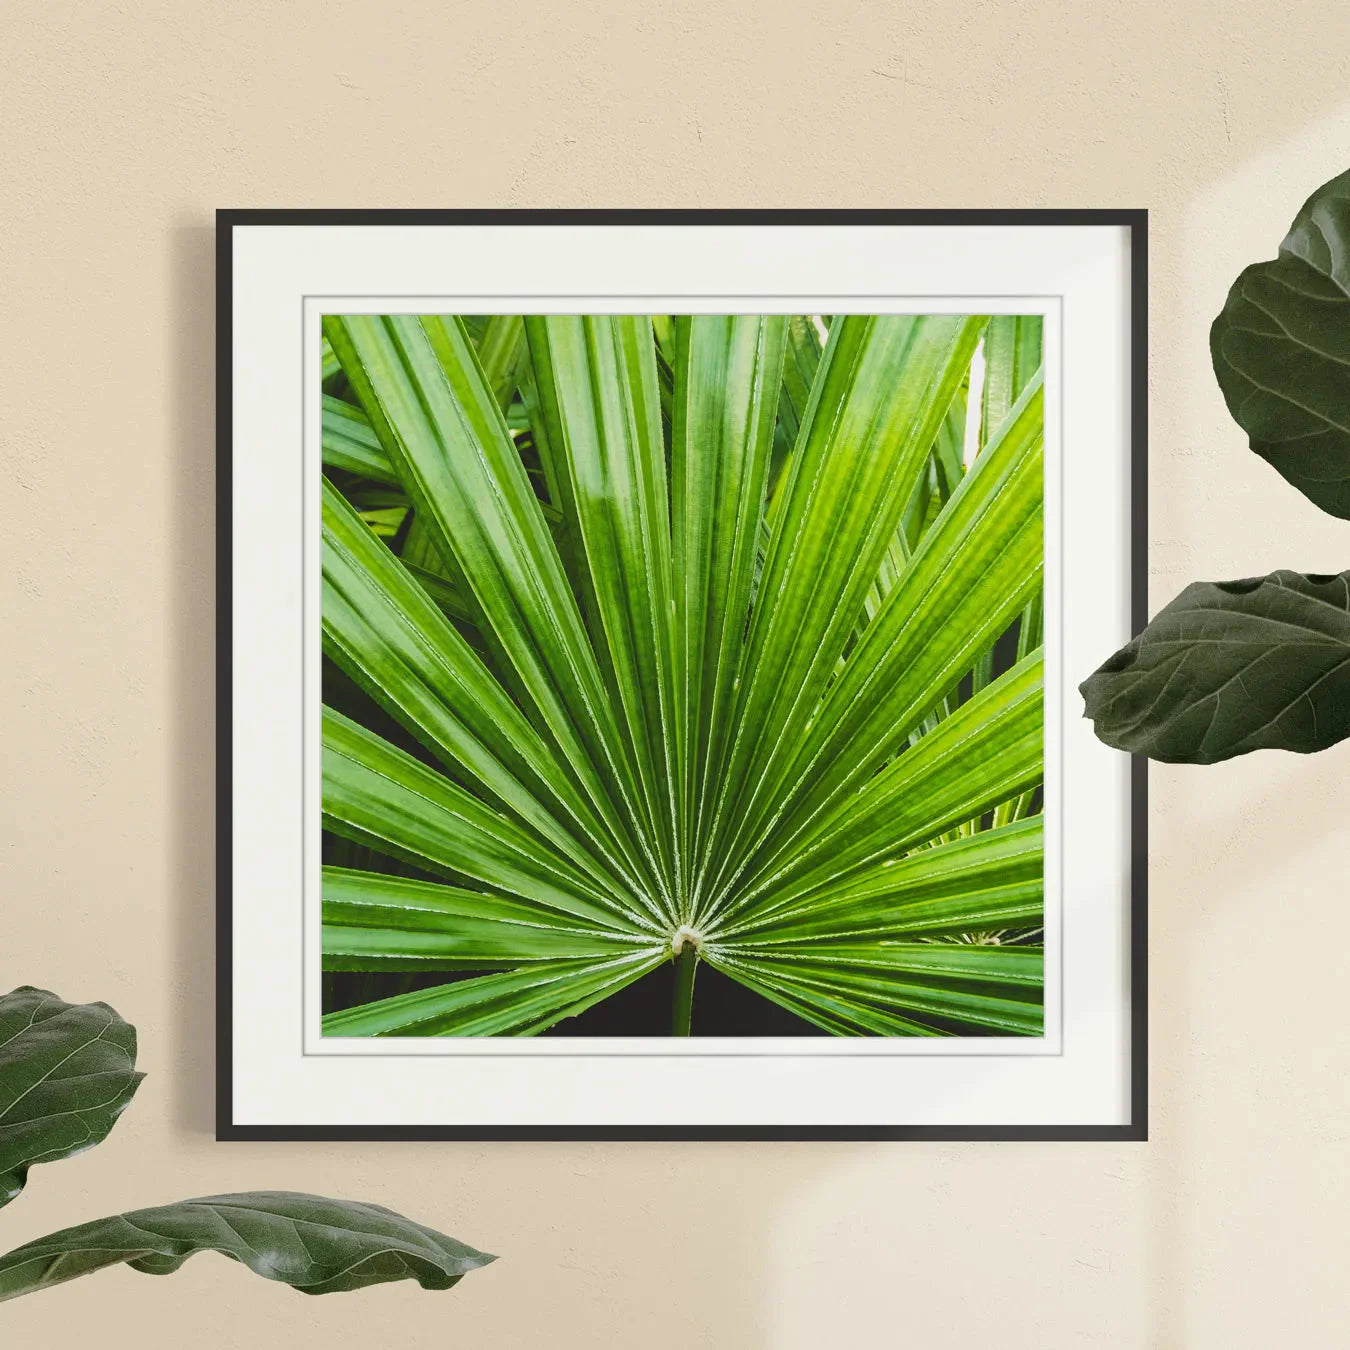 Peacocky Framed & Mounted Print - Posters Prints & Visual Artwork - Aesthetic Art